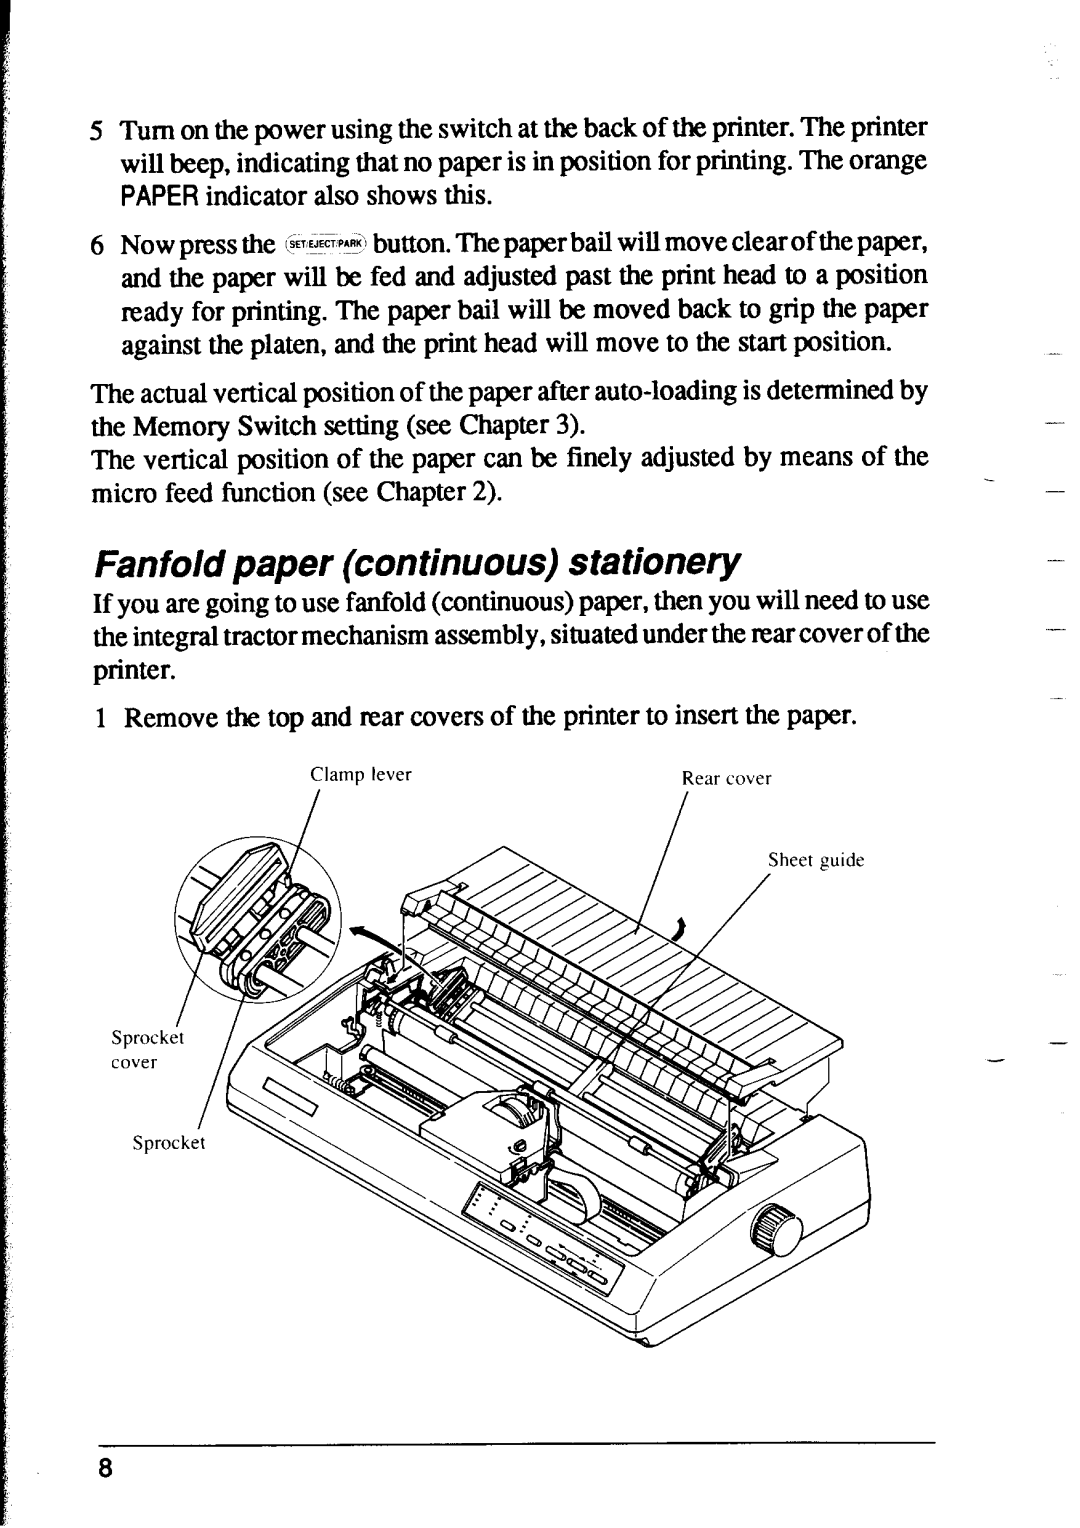 Star Micronics XR-1500, XR-1000 user manual Fanfold paper continuous stationery 